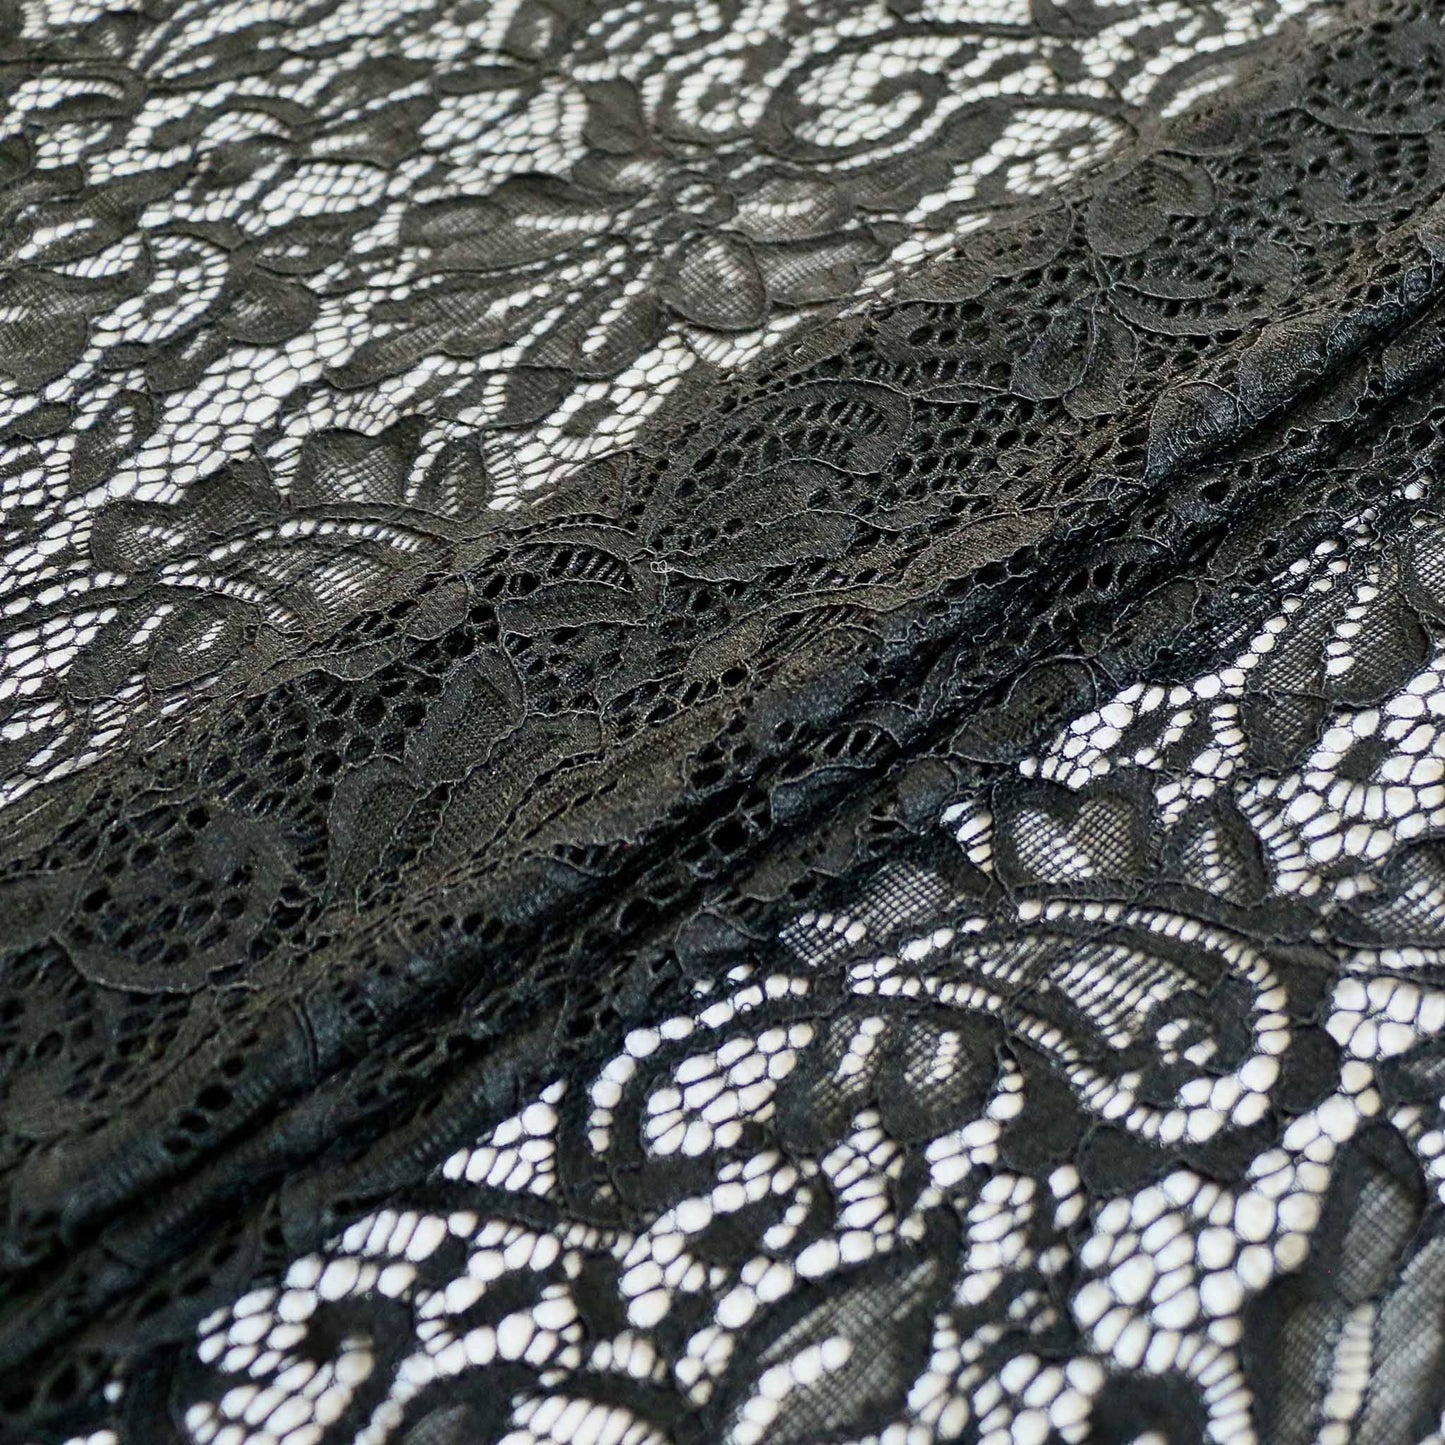 scalloped edged stretchy black lace fabric for dressmaking